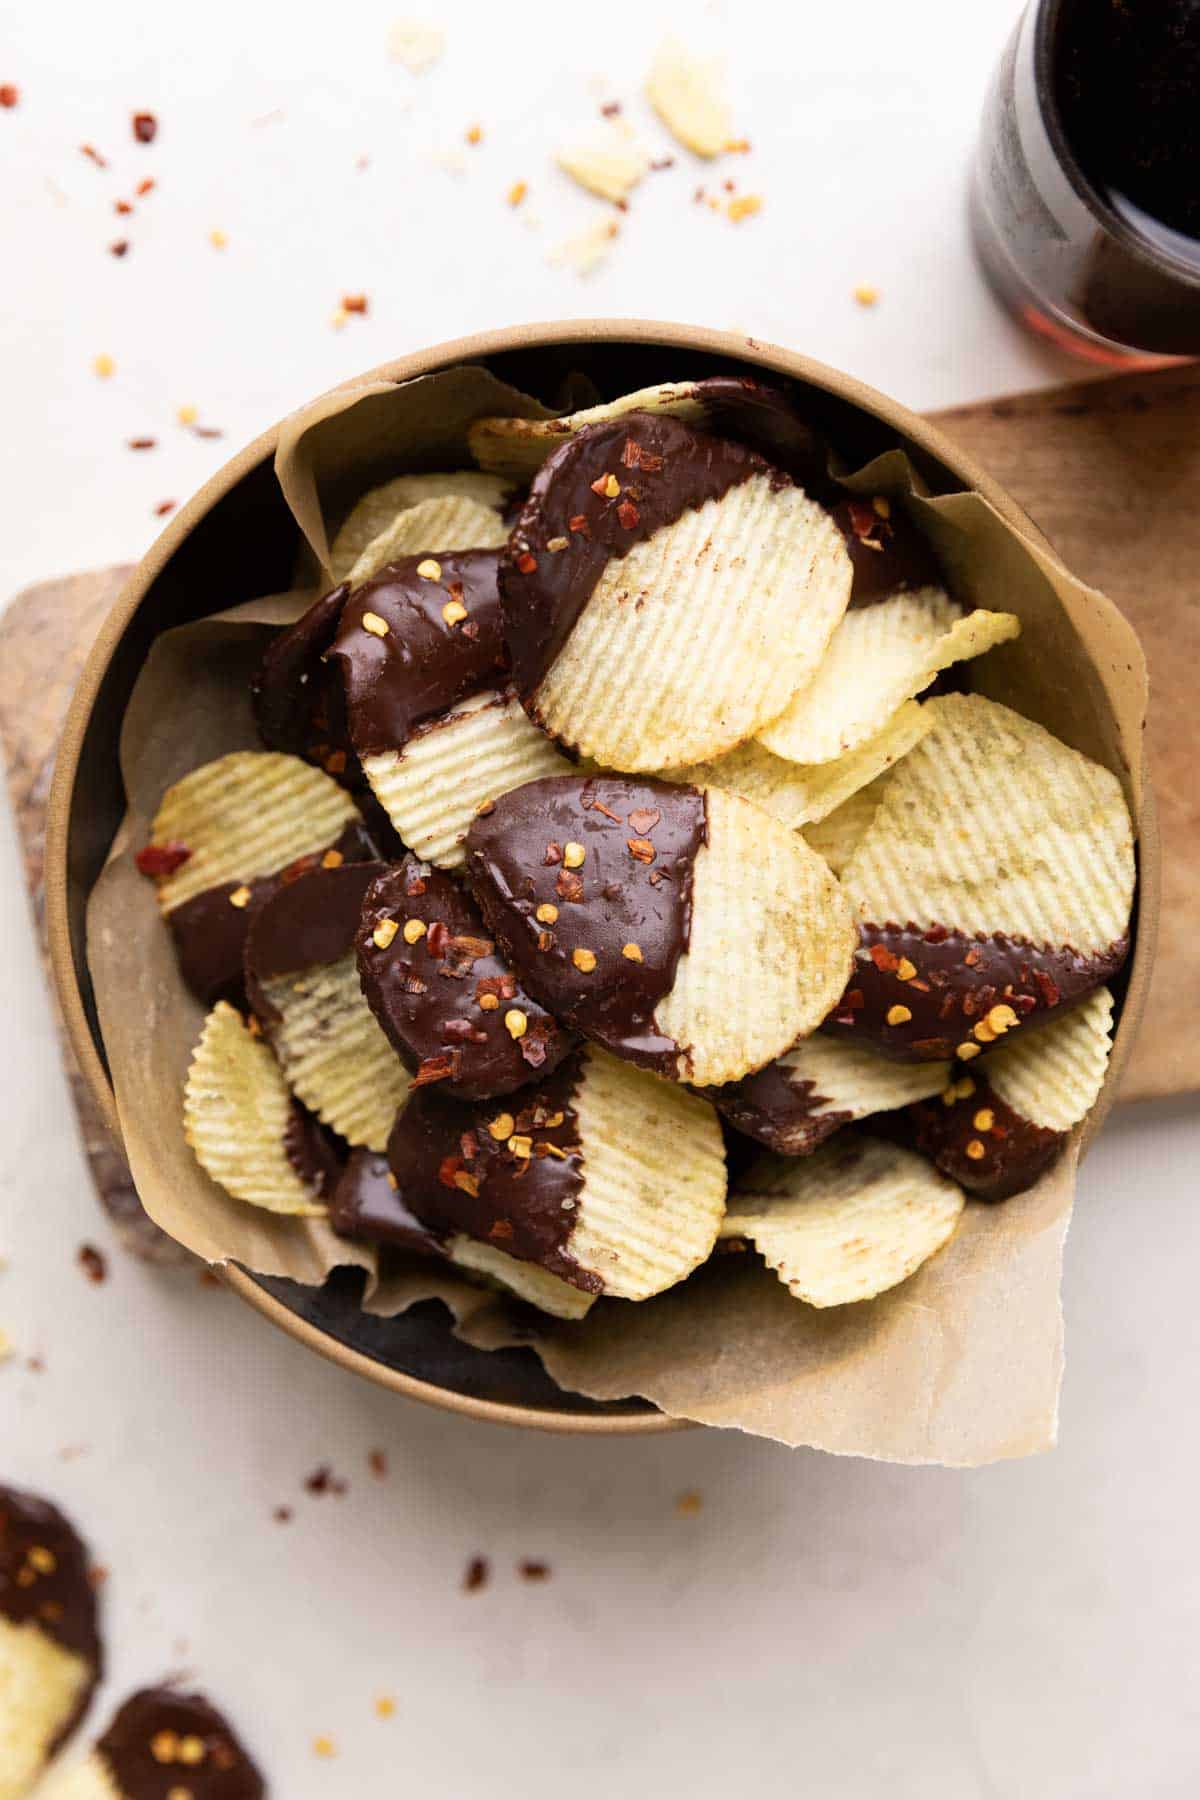 A picture of Chili Chocolate covered Potato Chips in a bowl.